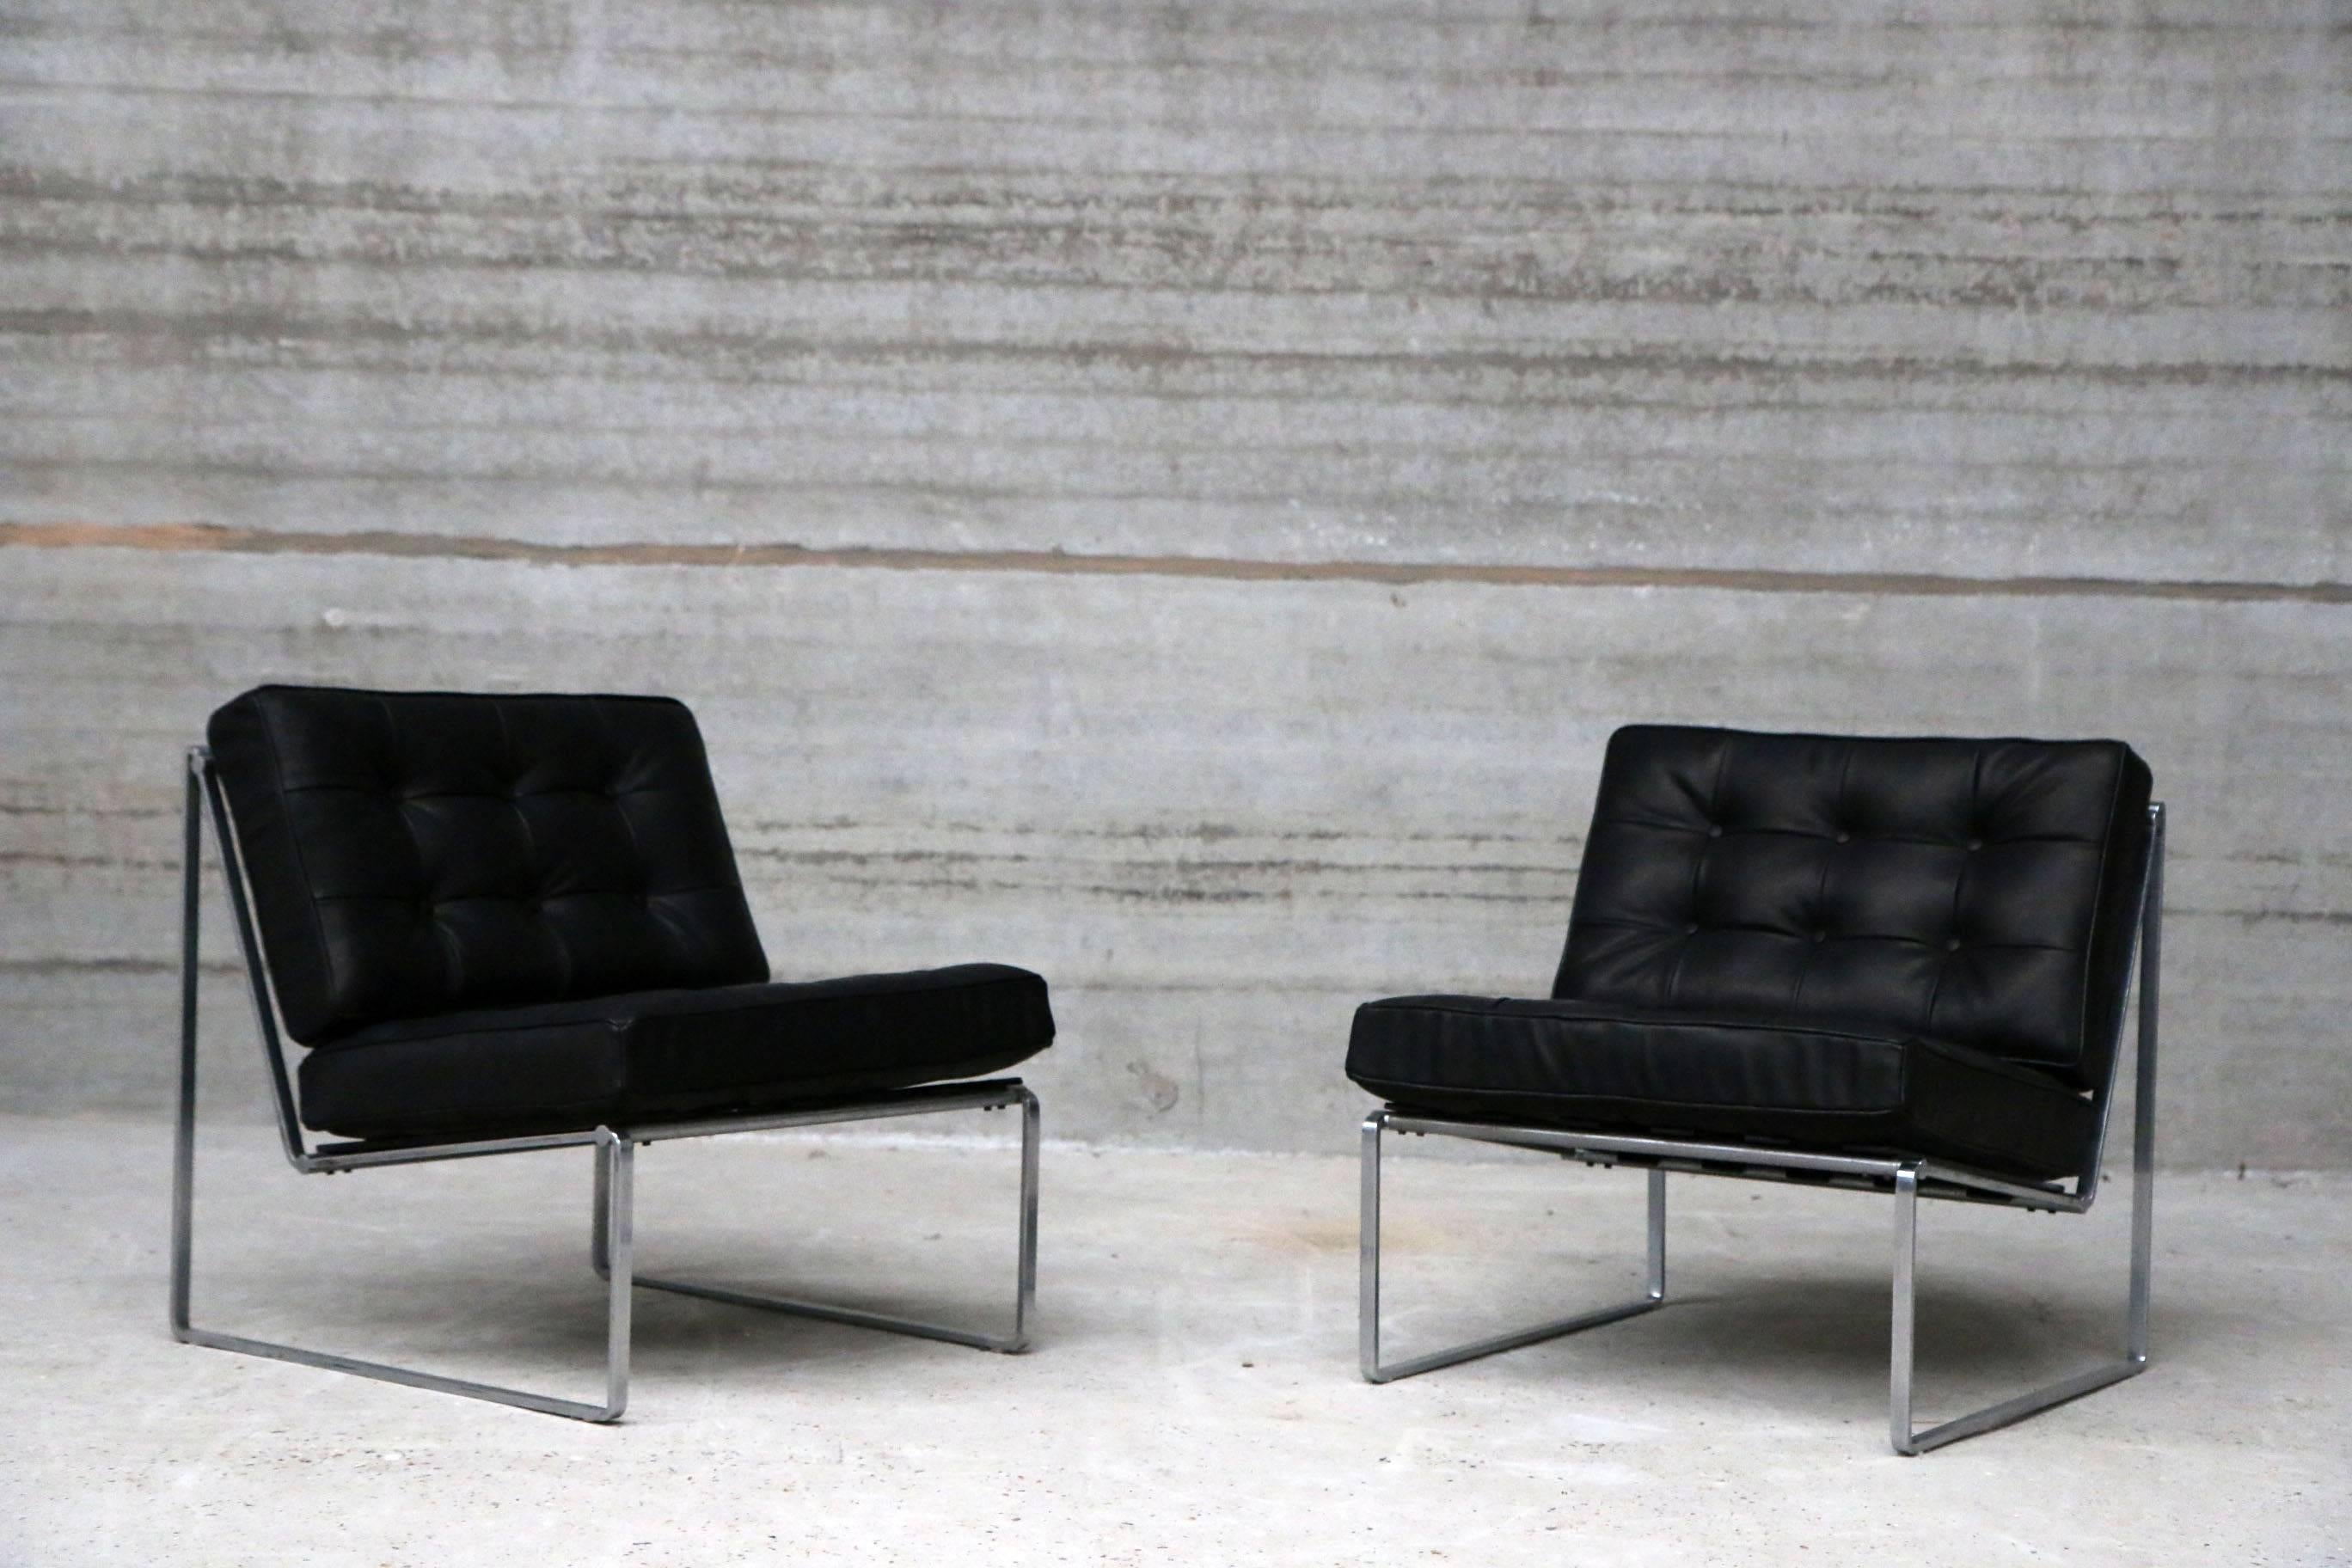 This set of two chromed steel and lacquered wood easy chairs, designed by Kho Liang Le for Artifort series 024 and manufactured in the Netherlands in 1962. Very good condition. Re-upholstered in our full grain black leather
Original table available.